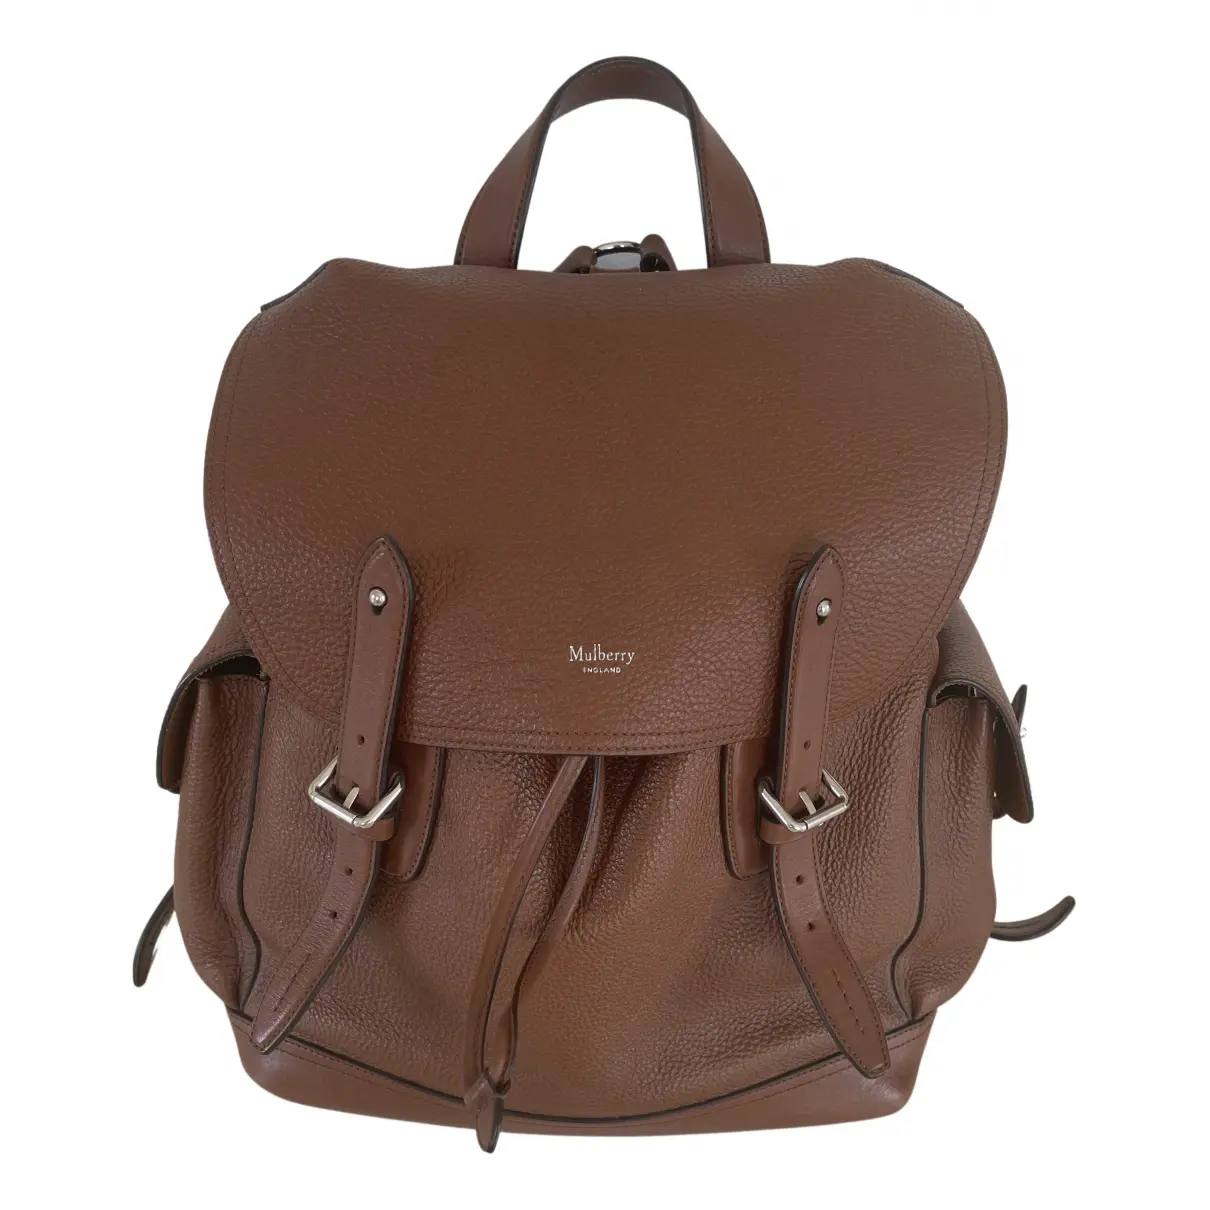 Heritage leather satchel Mulberry